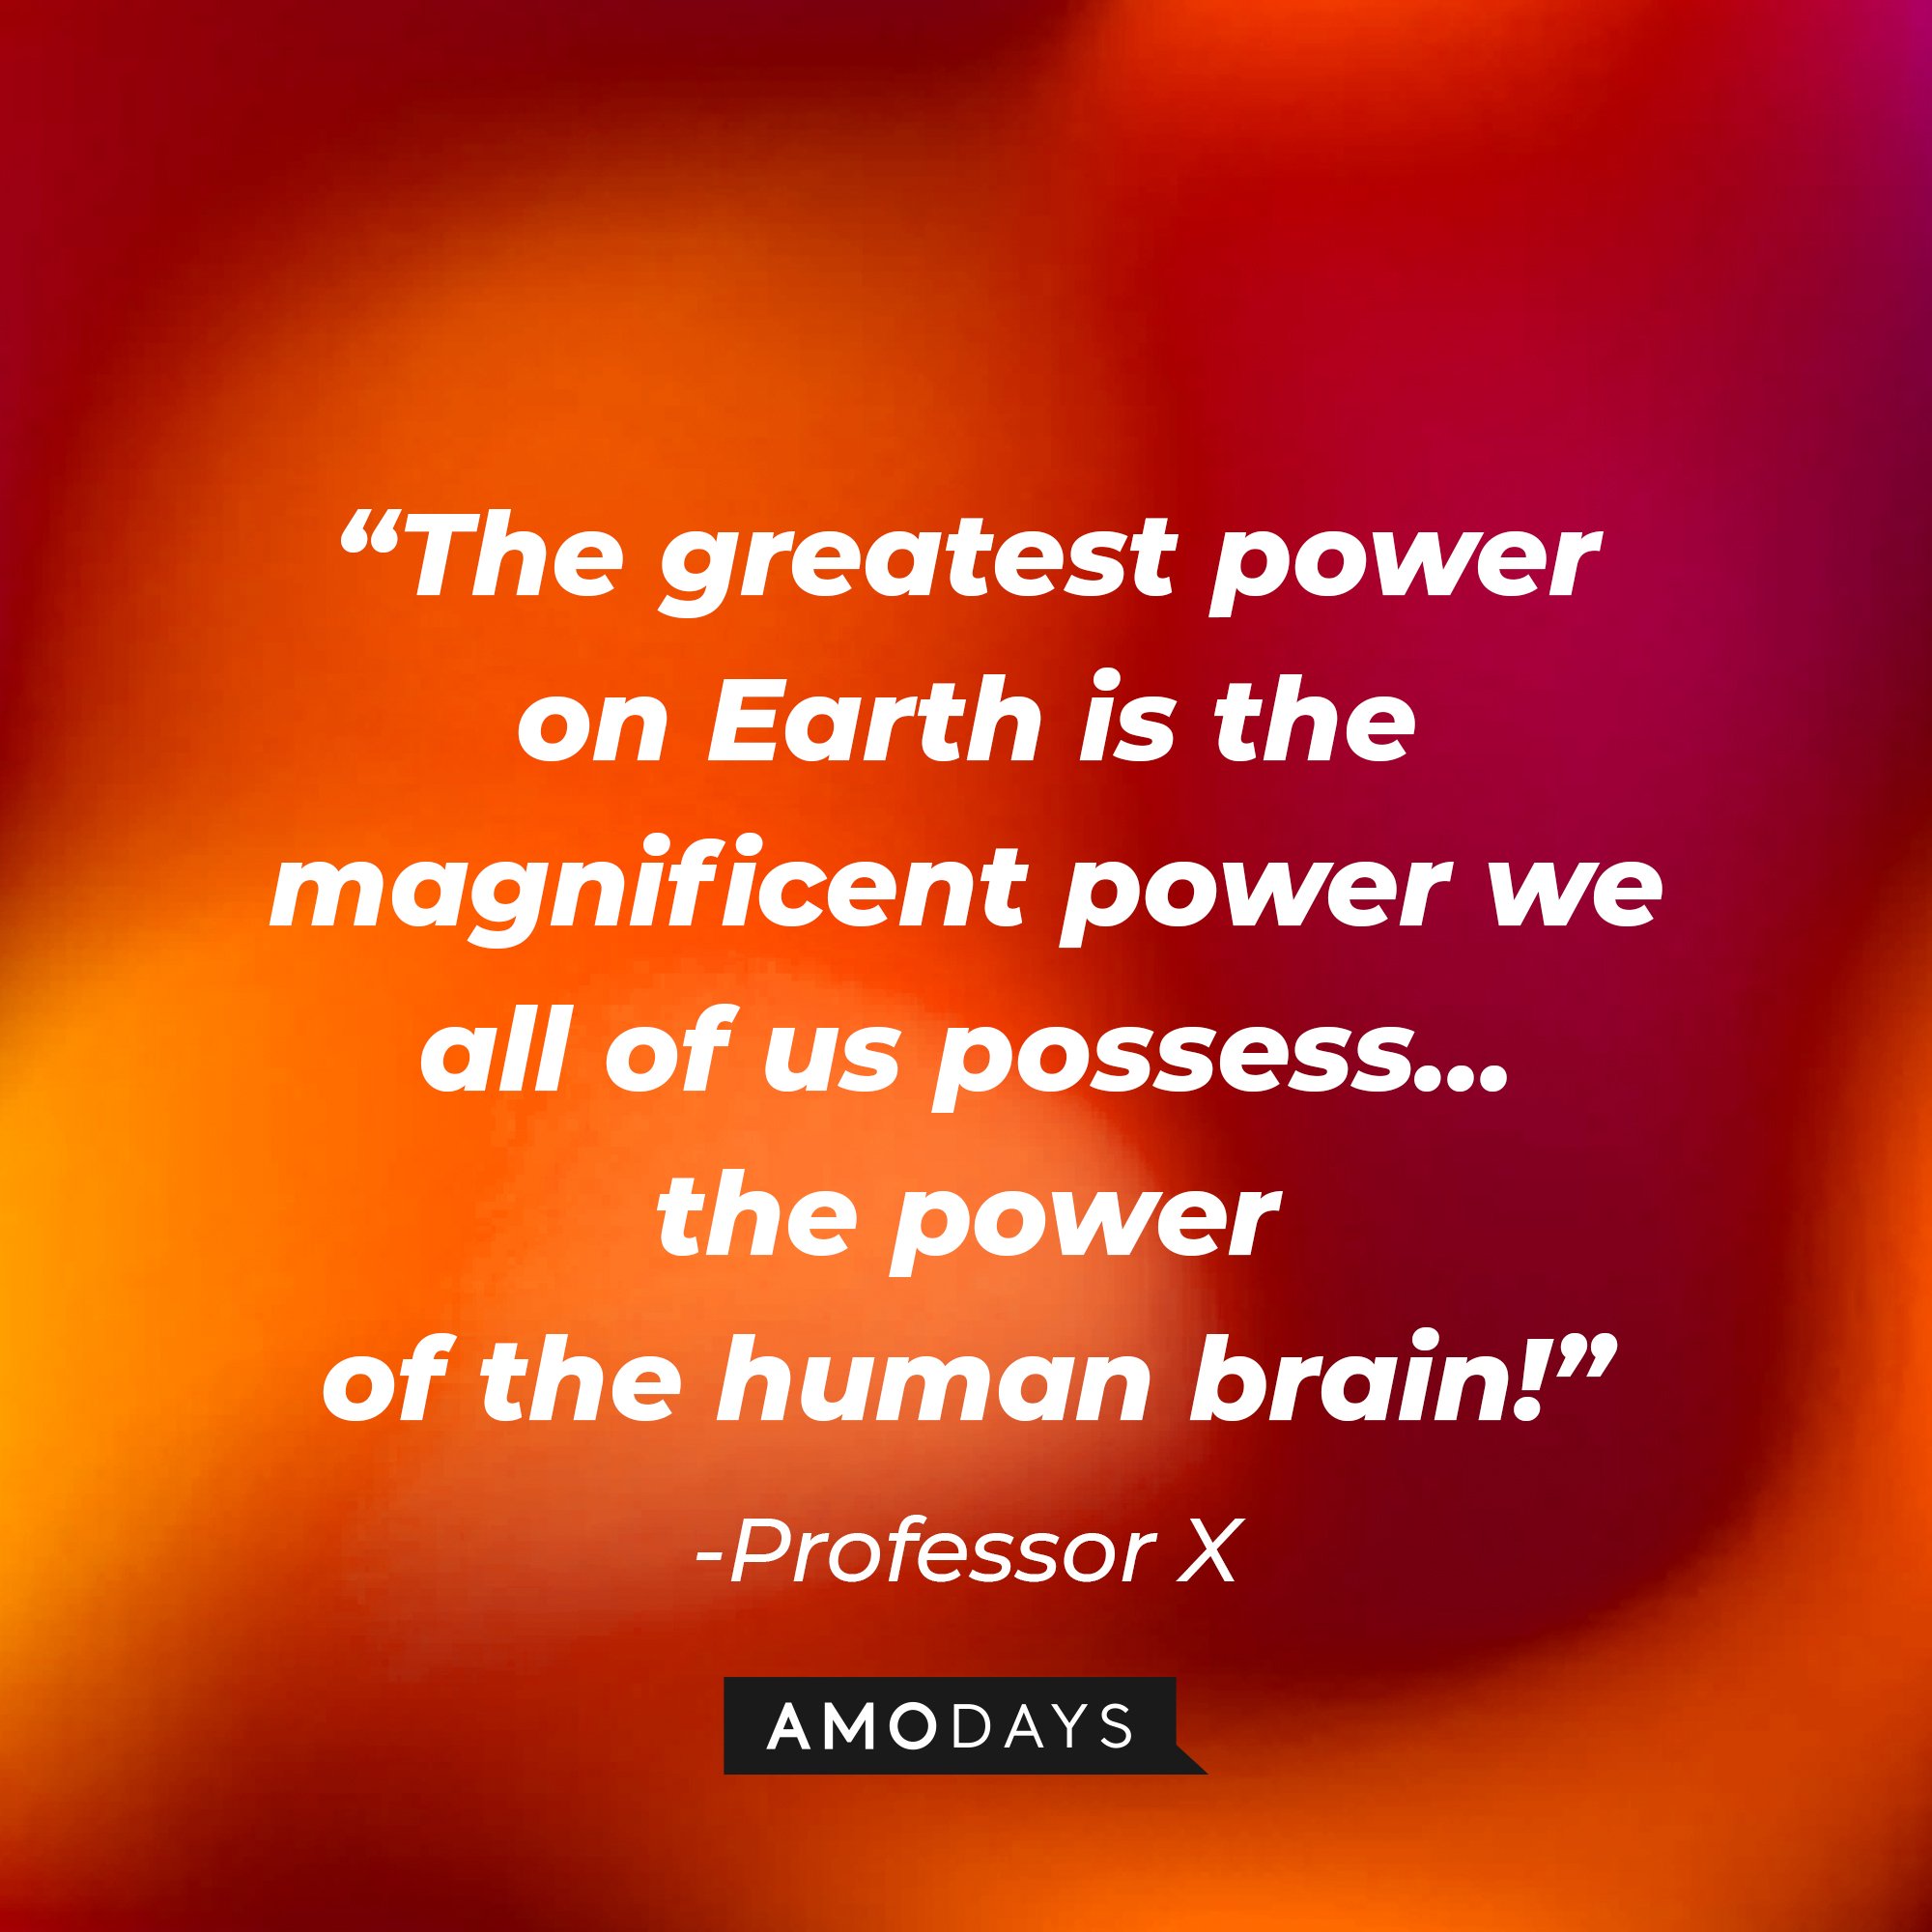 Professor X's quote: “The greatest power on Earth is the magnificent power we all of us possess… the power of the human brain!” | Image: AmoDays